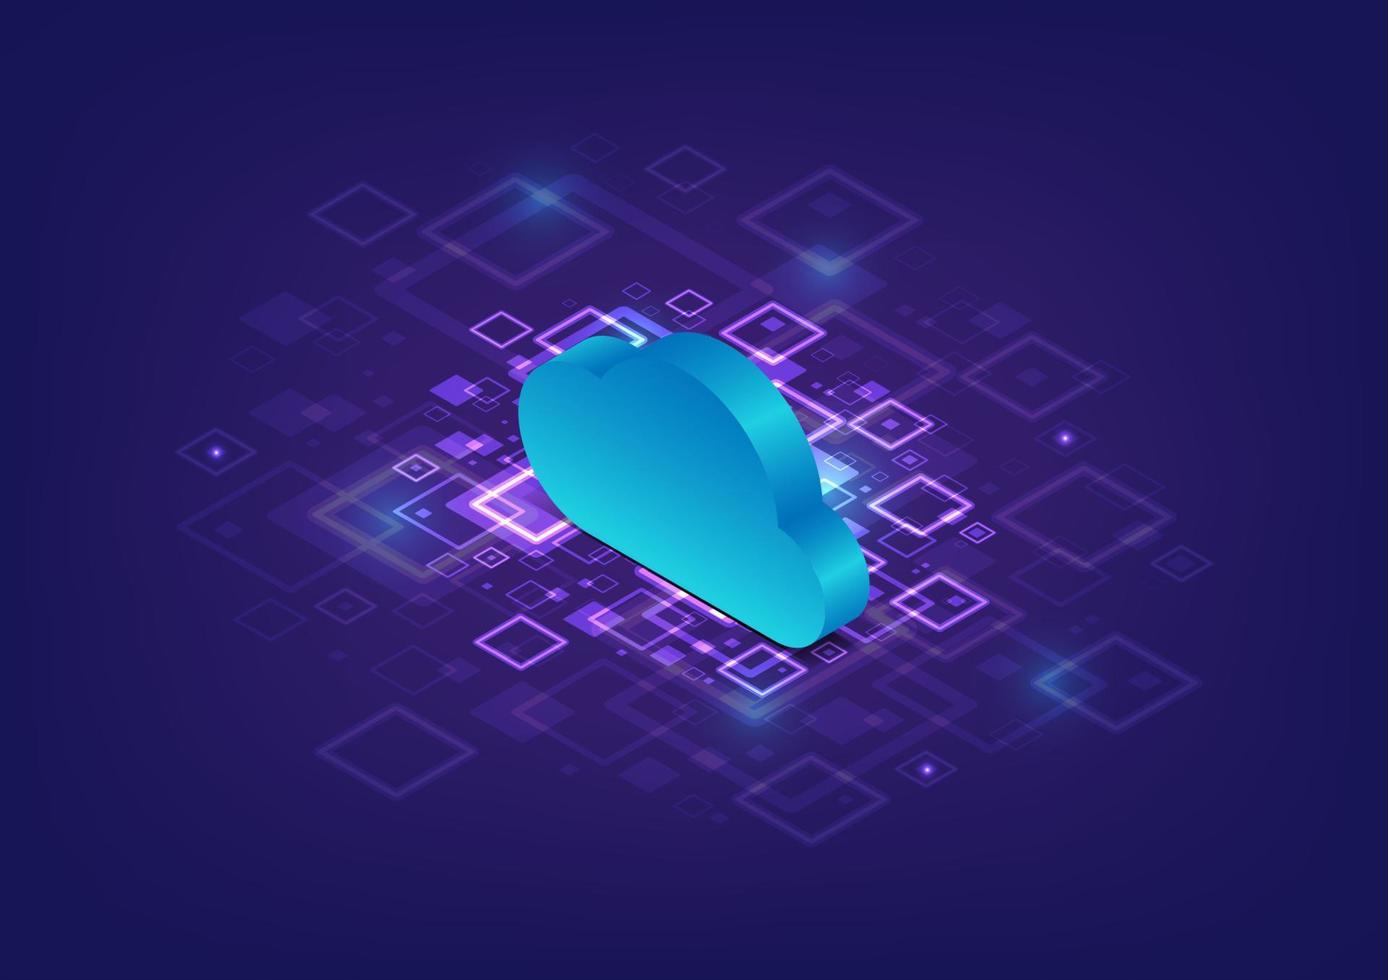 Isometric blue cloud on square shape pattern purple background. cloud computing and data storage concept. Vector illustration.